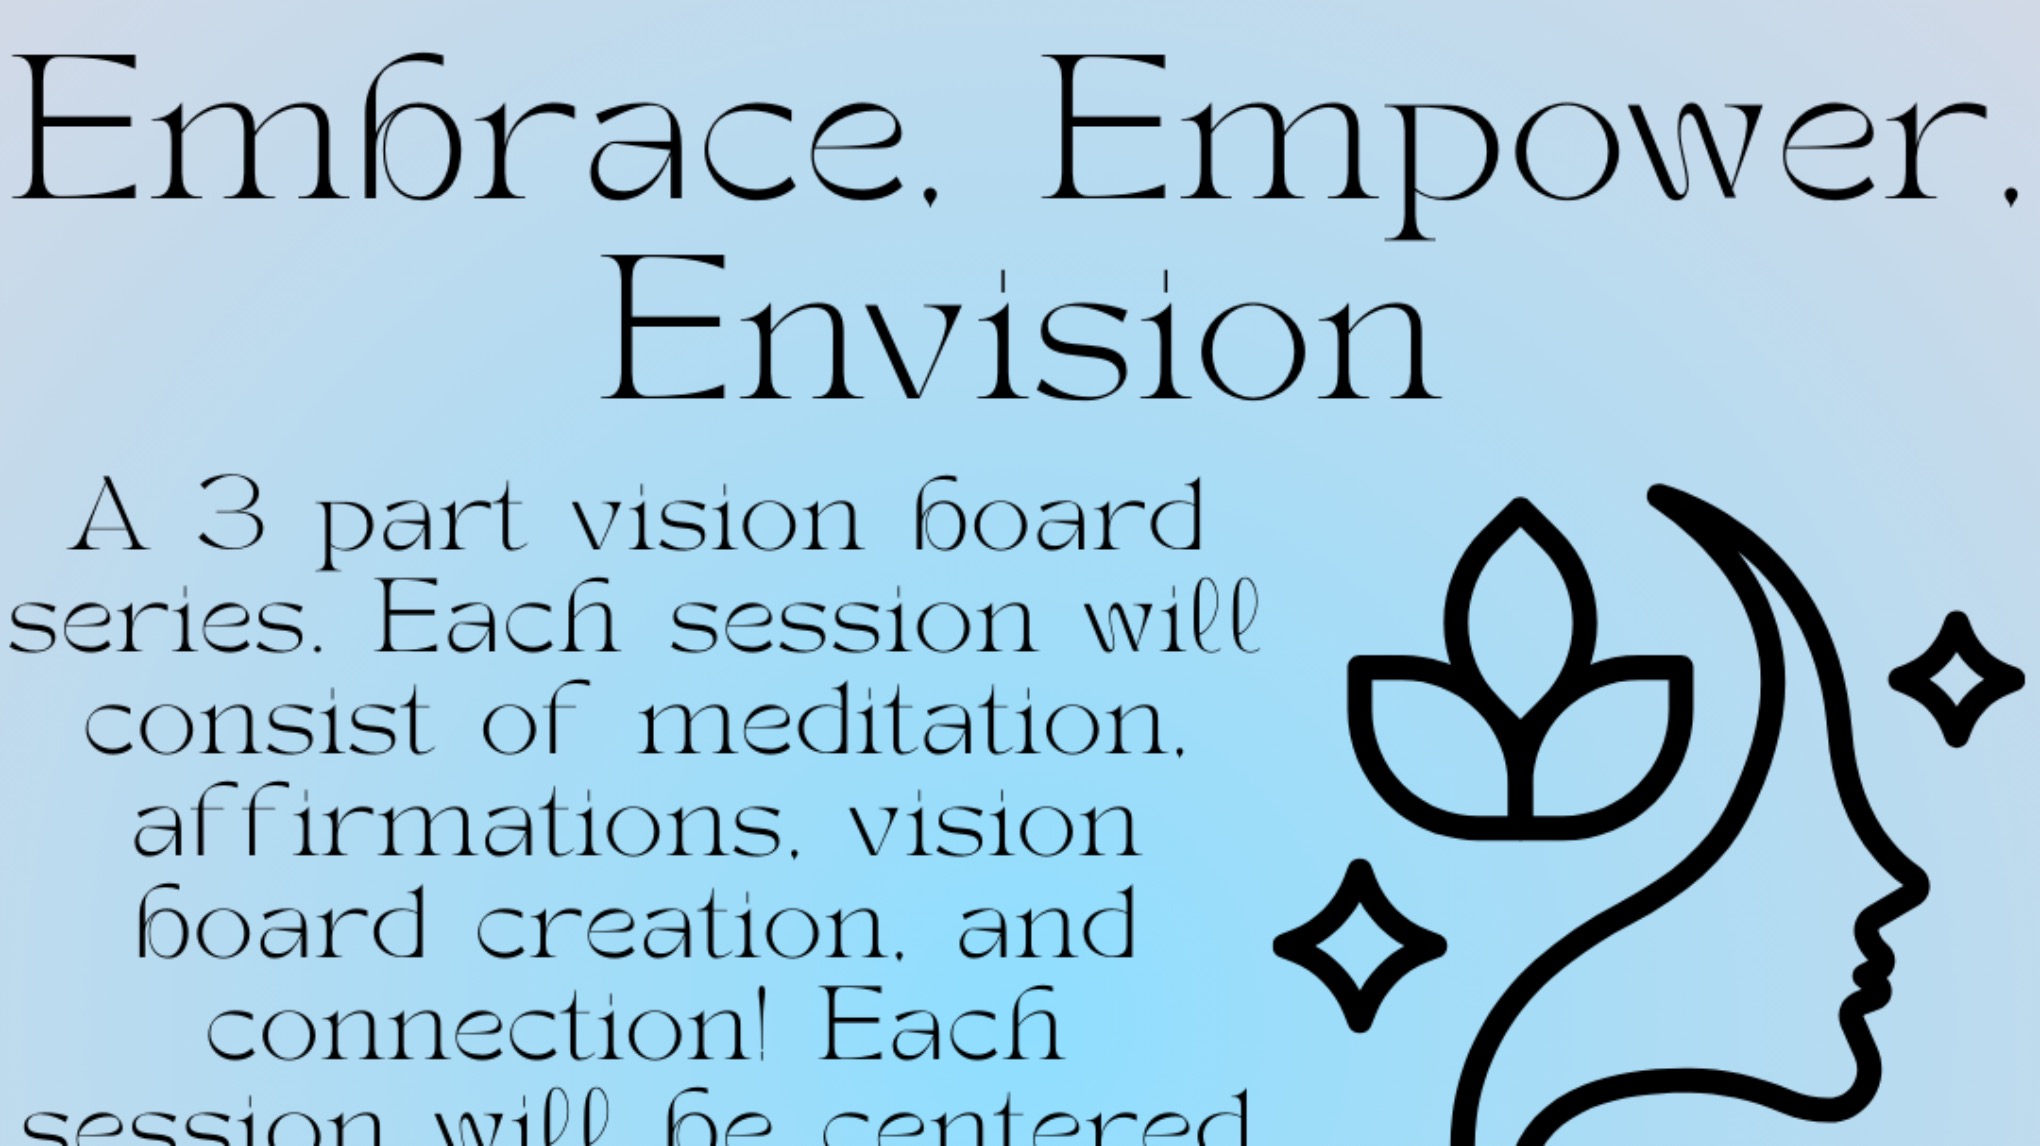 Embrace, Empower, Envision